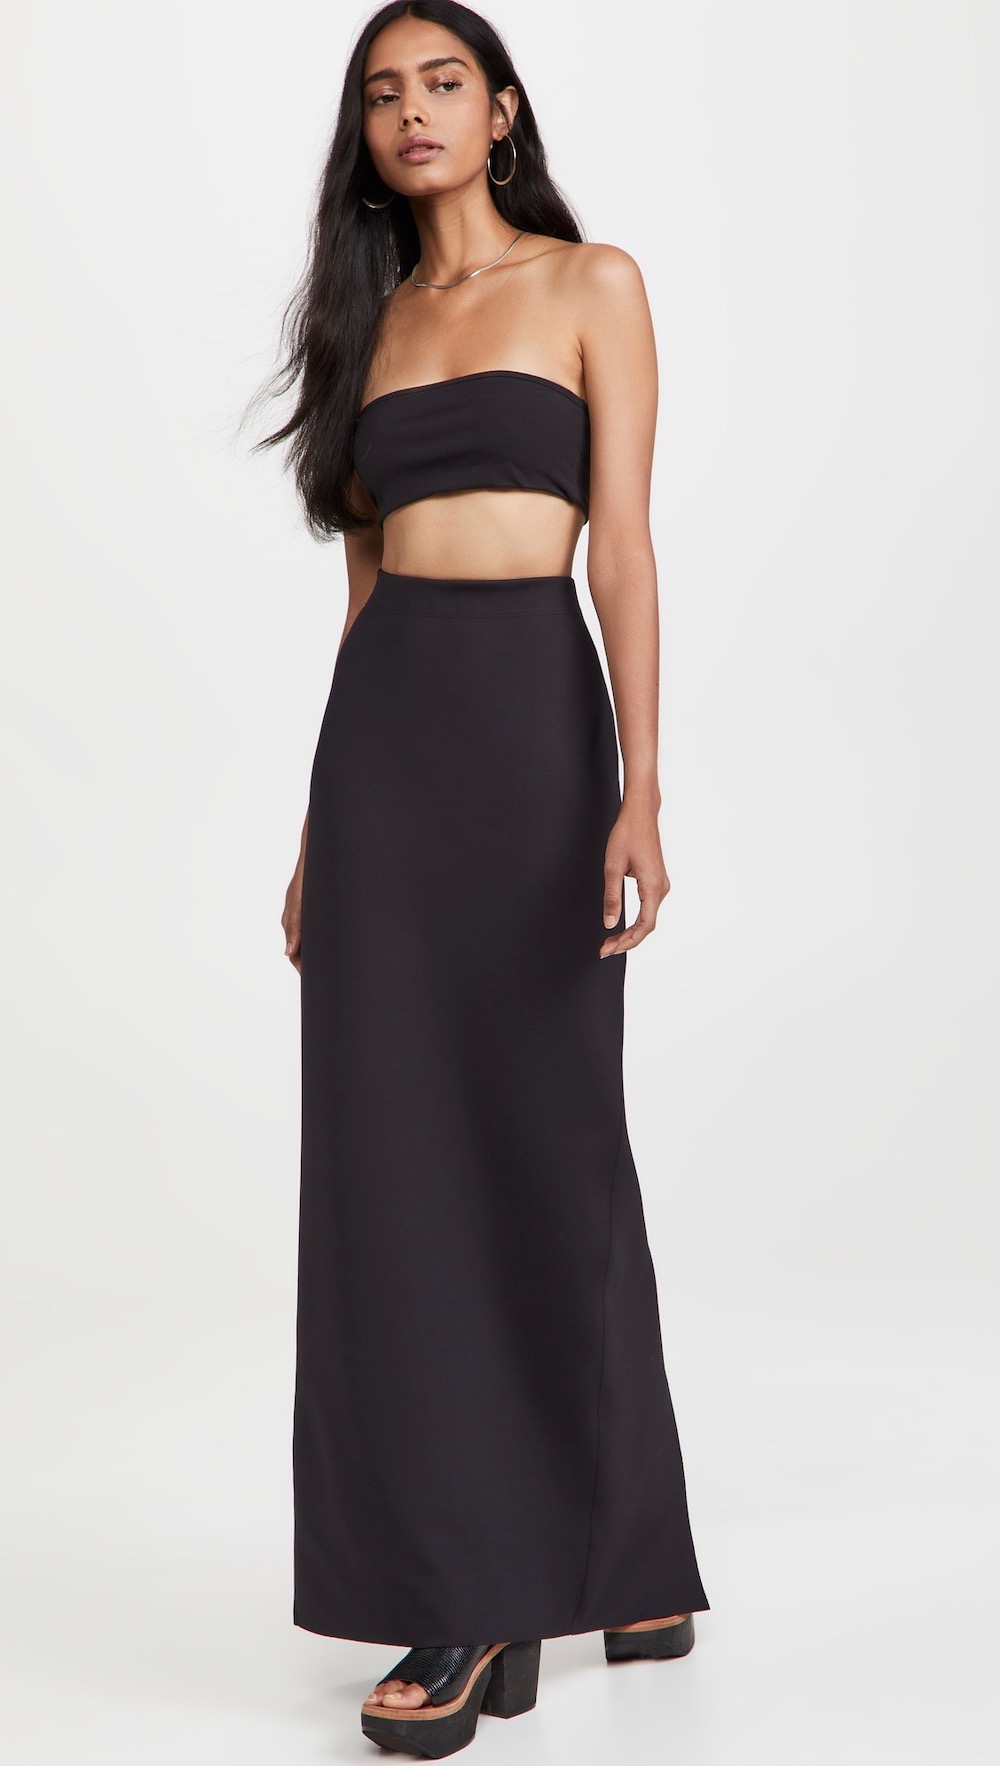 Fall-Appropriate Maxi Skirts for Every Occasion - theFashionSpot